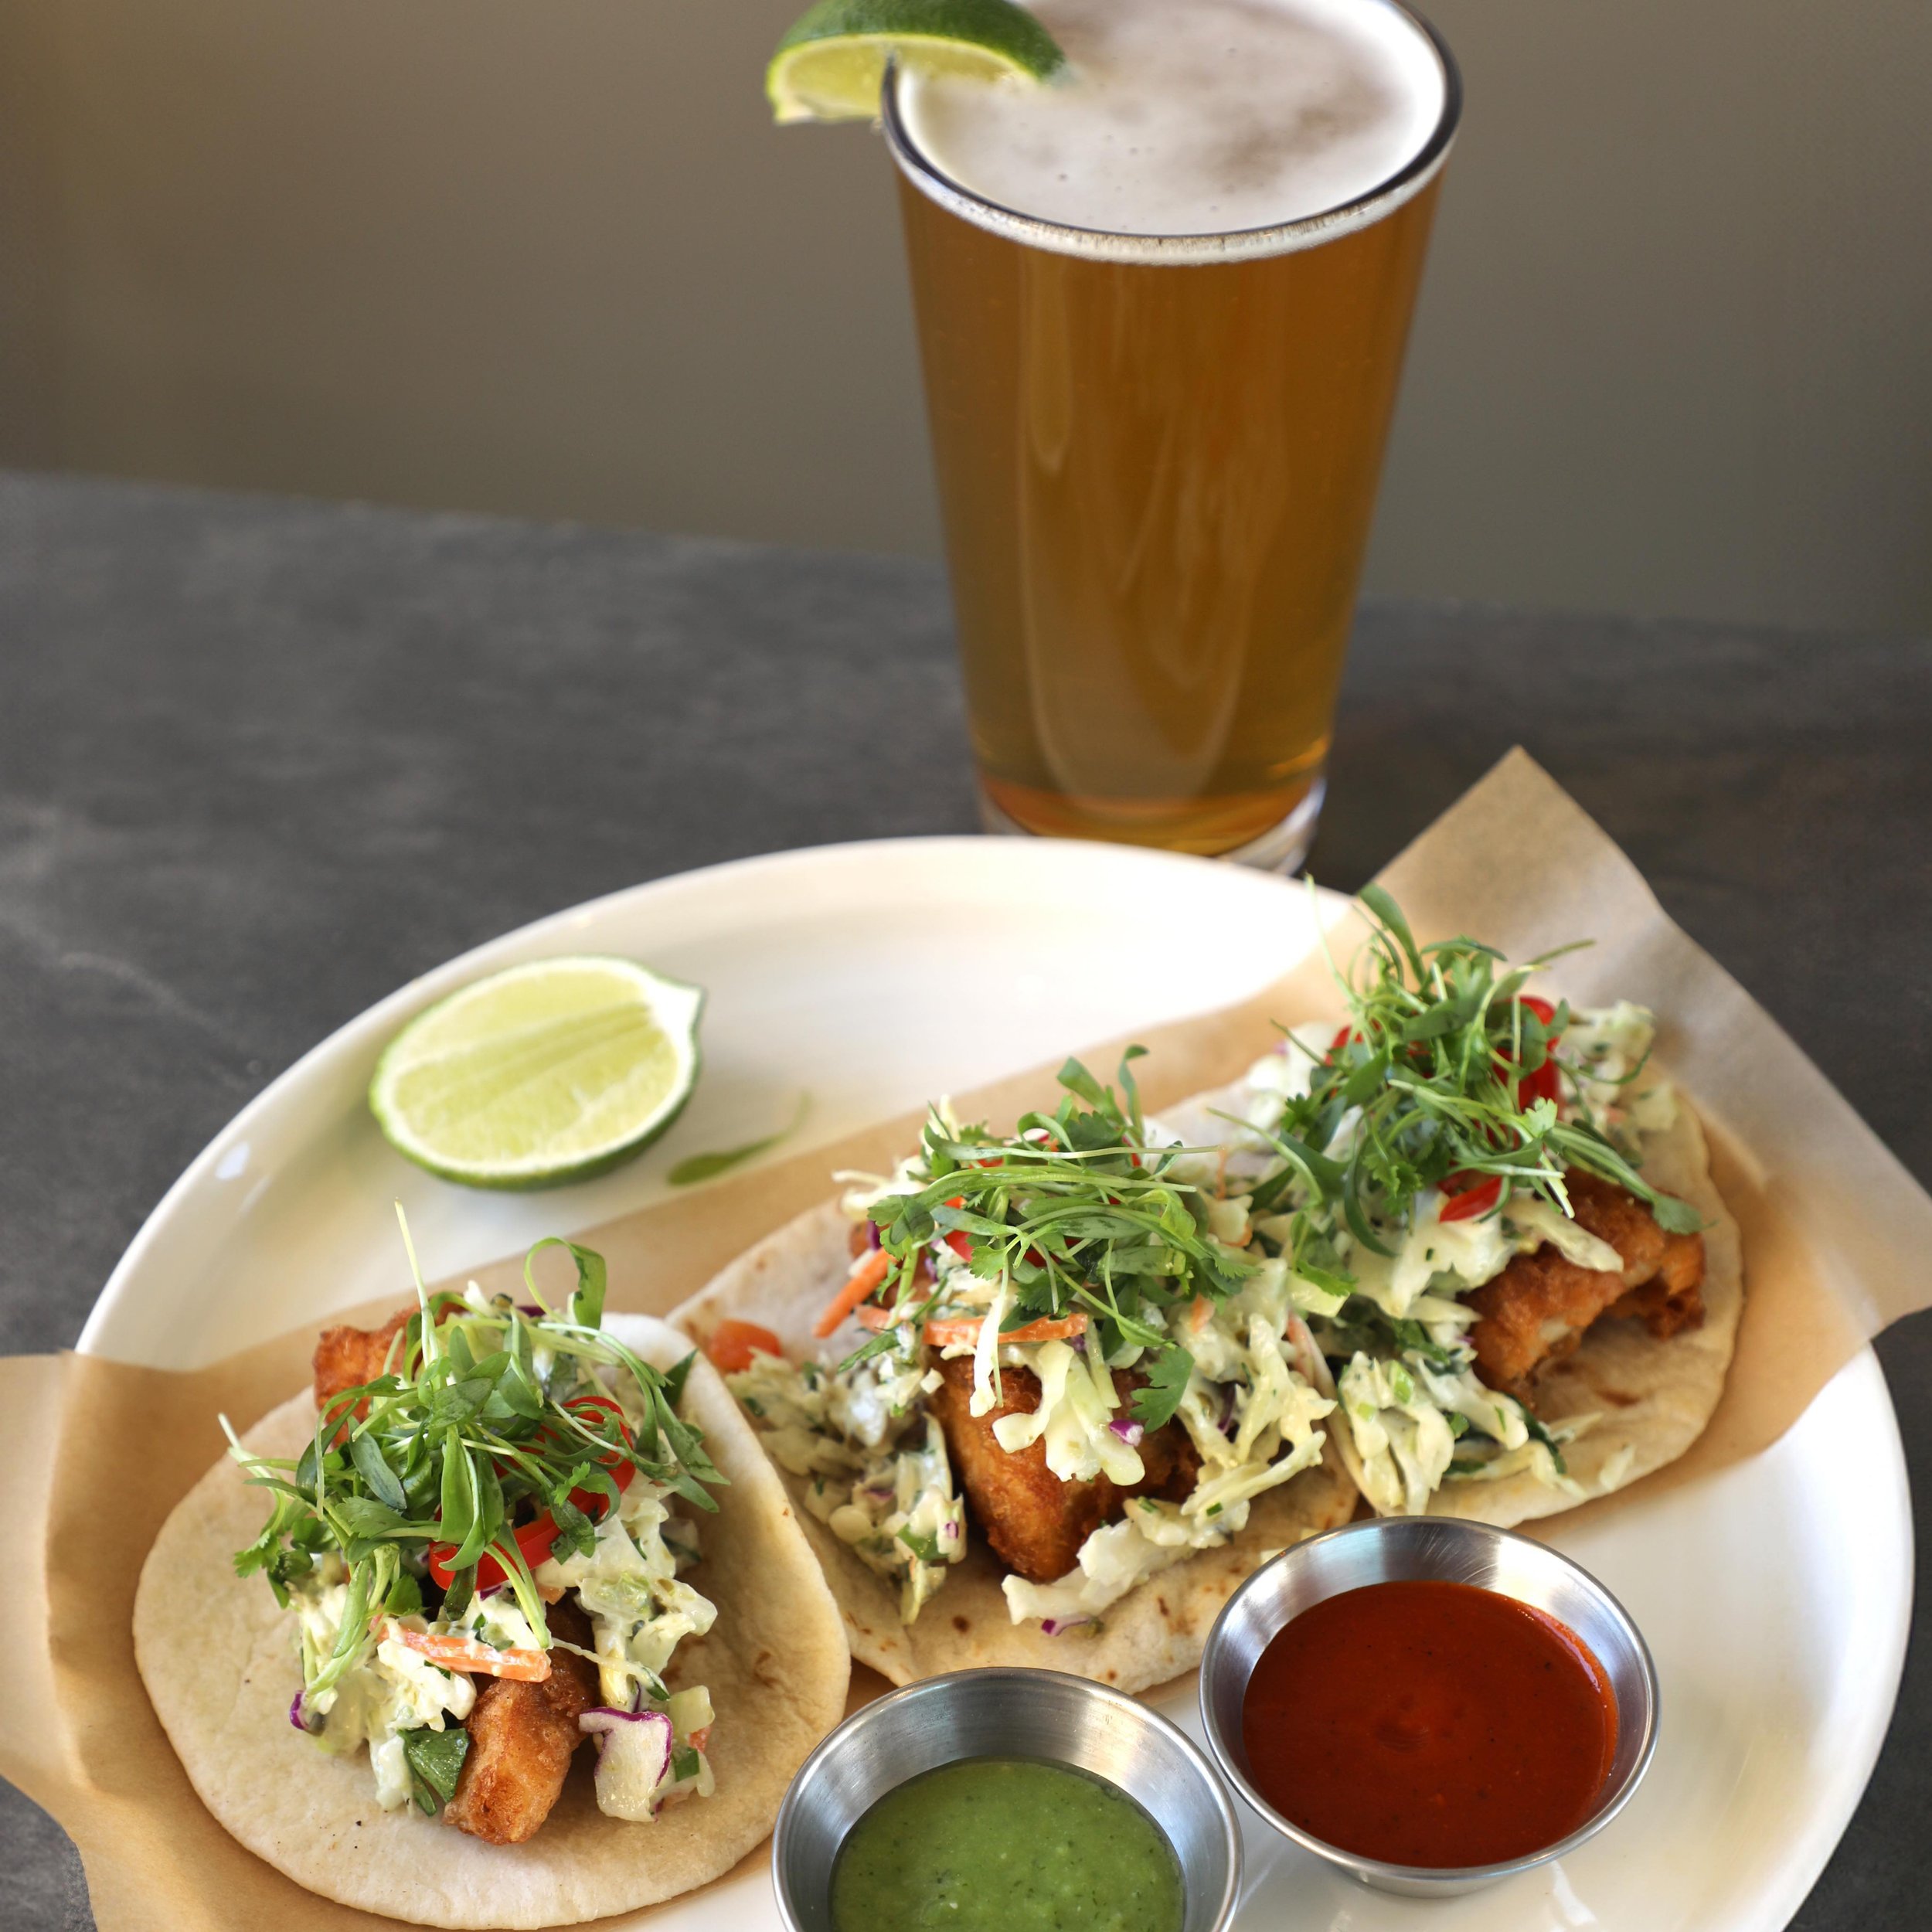 Dive into our mouthwatering brunch specials: our fan favorite Seabass Tacos beer-battered in @pacificobeer!

Grab your fork and surfboard because this brunch is about to take your taste buds on a wild weekend ride!
Cheers to the freakin&rsquo; weeken